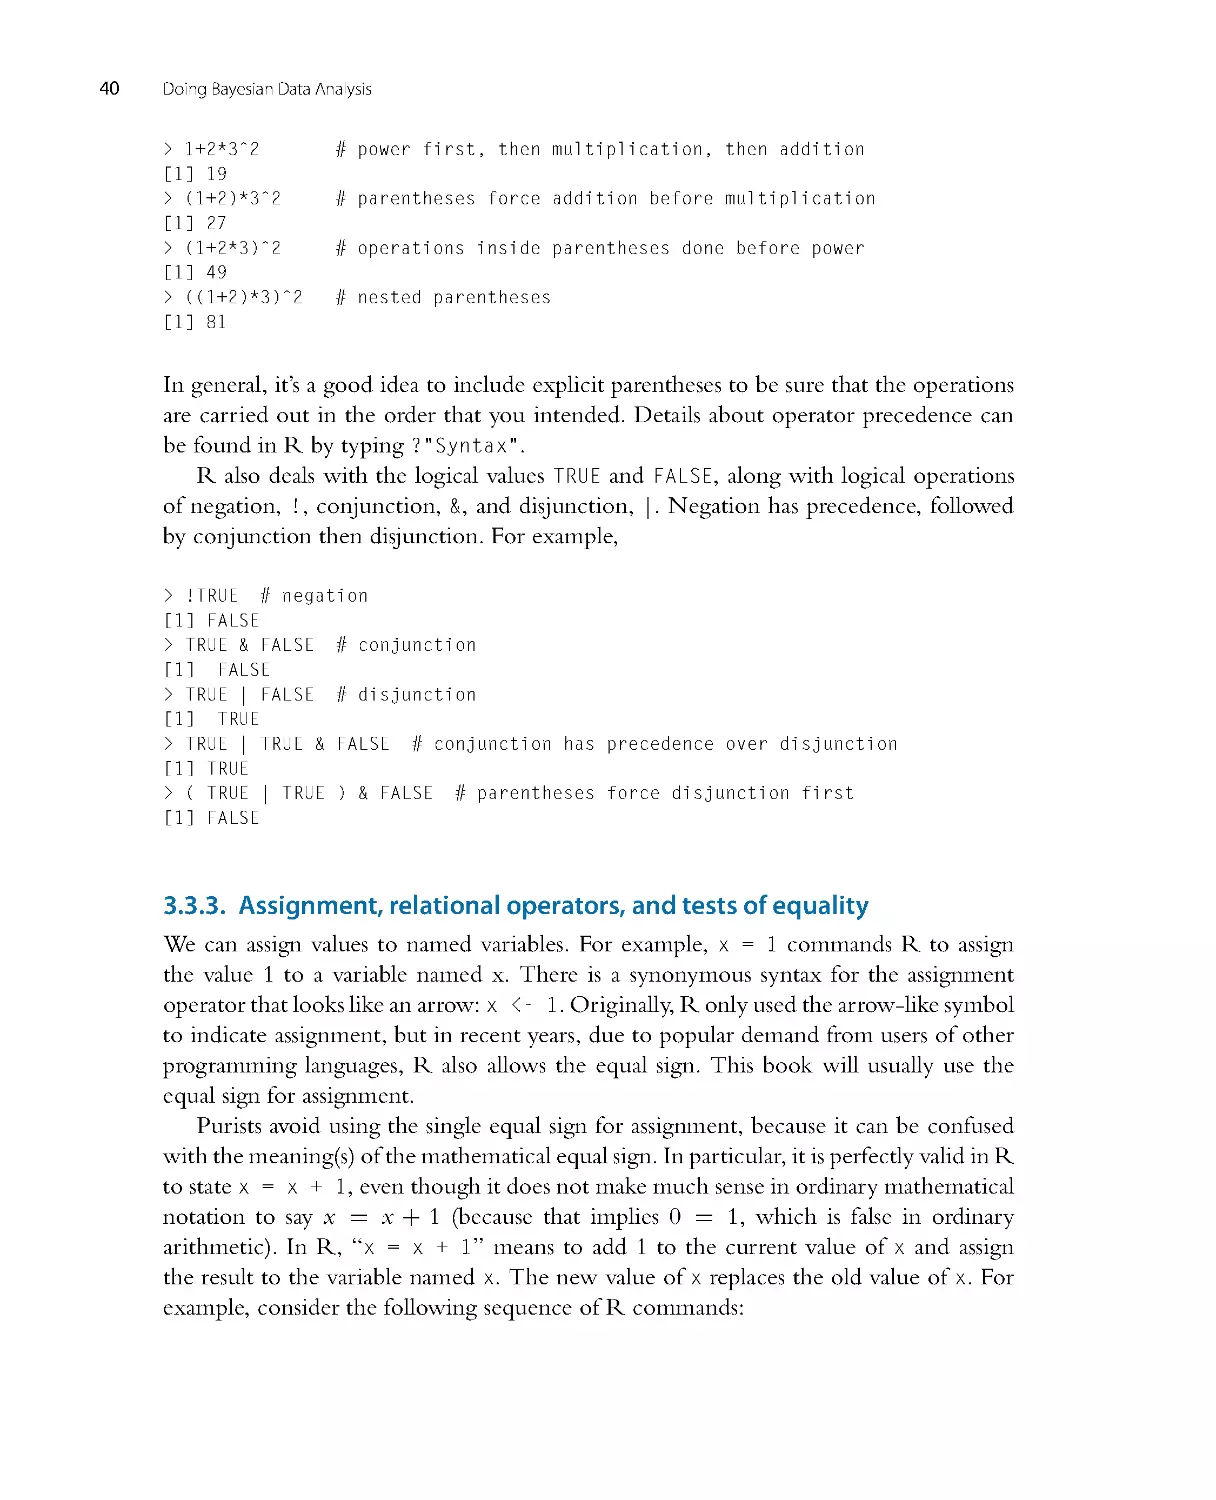 Assignment, relational operators, and tests of equality